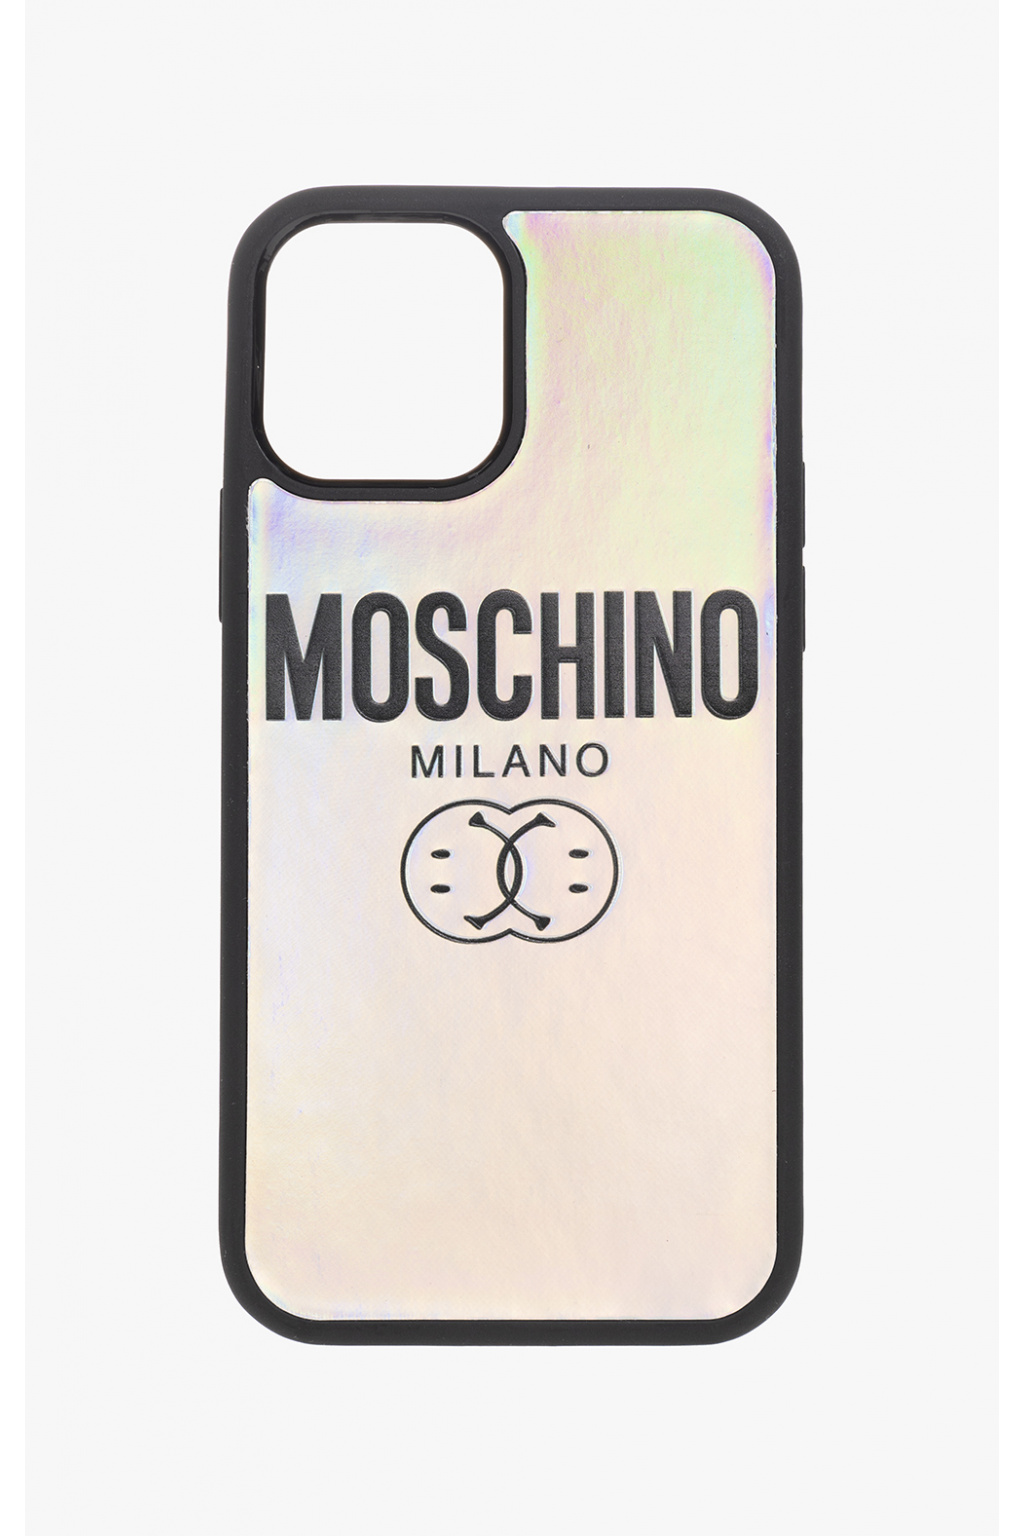 Moschino Download the updated version of the app®